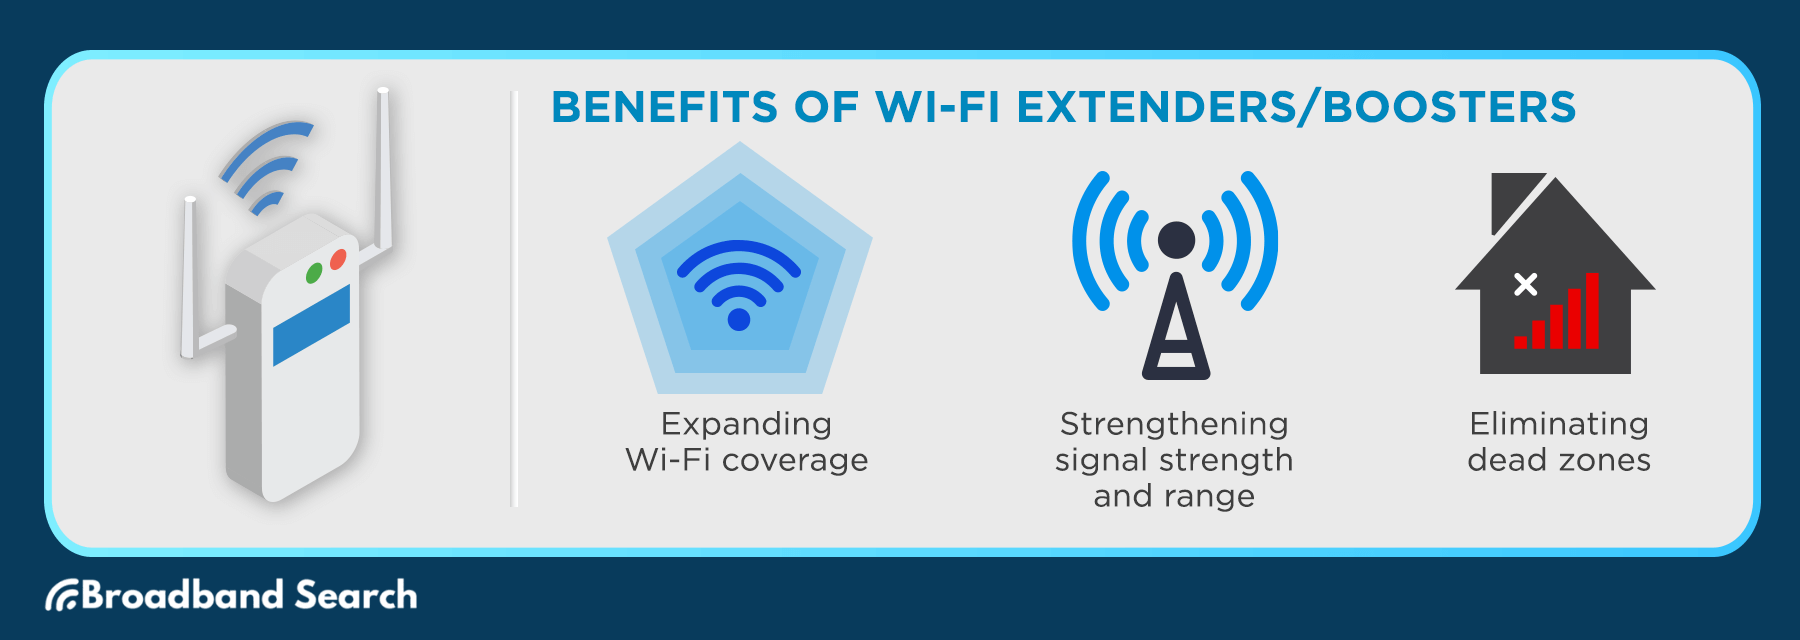 Graphic showing the Benefits of Wi-Fi Extenders/Boosters